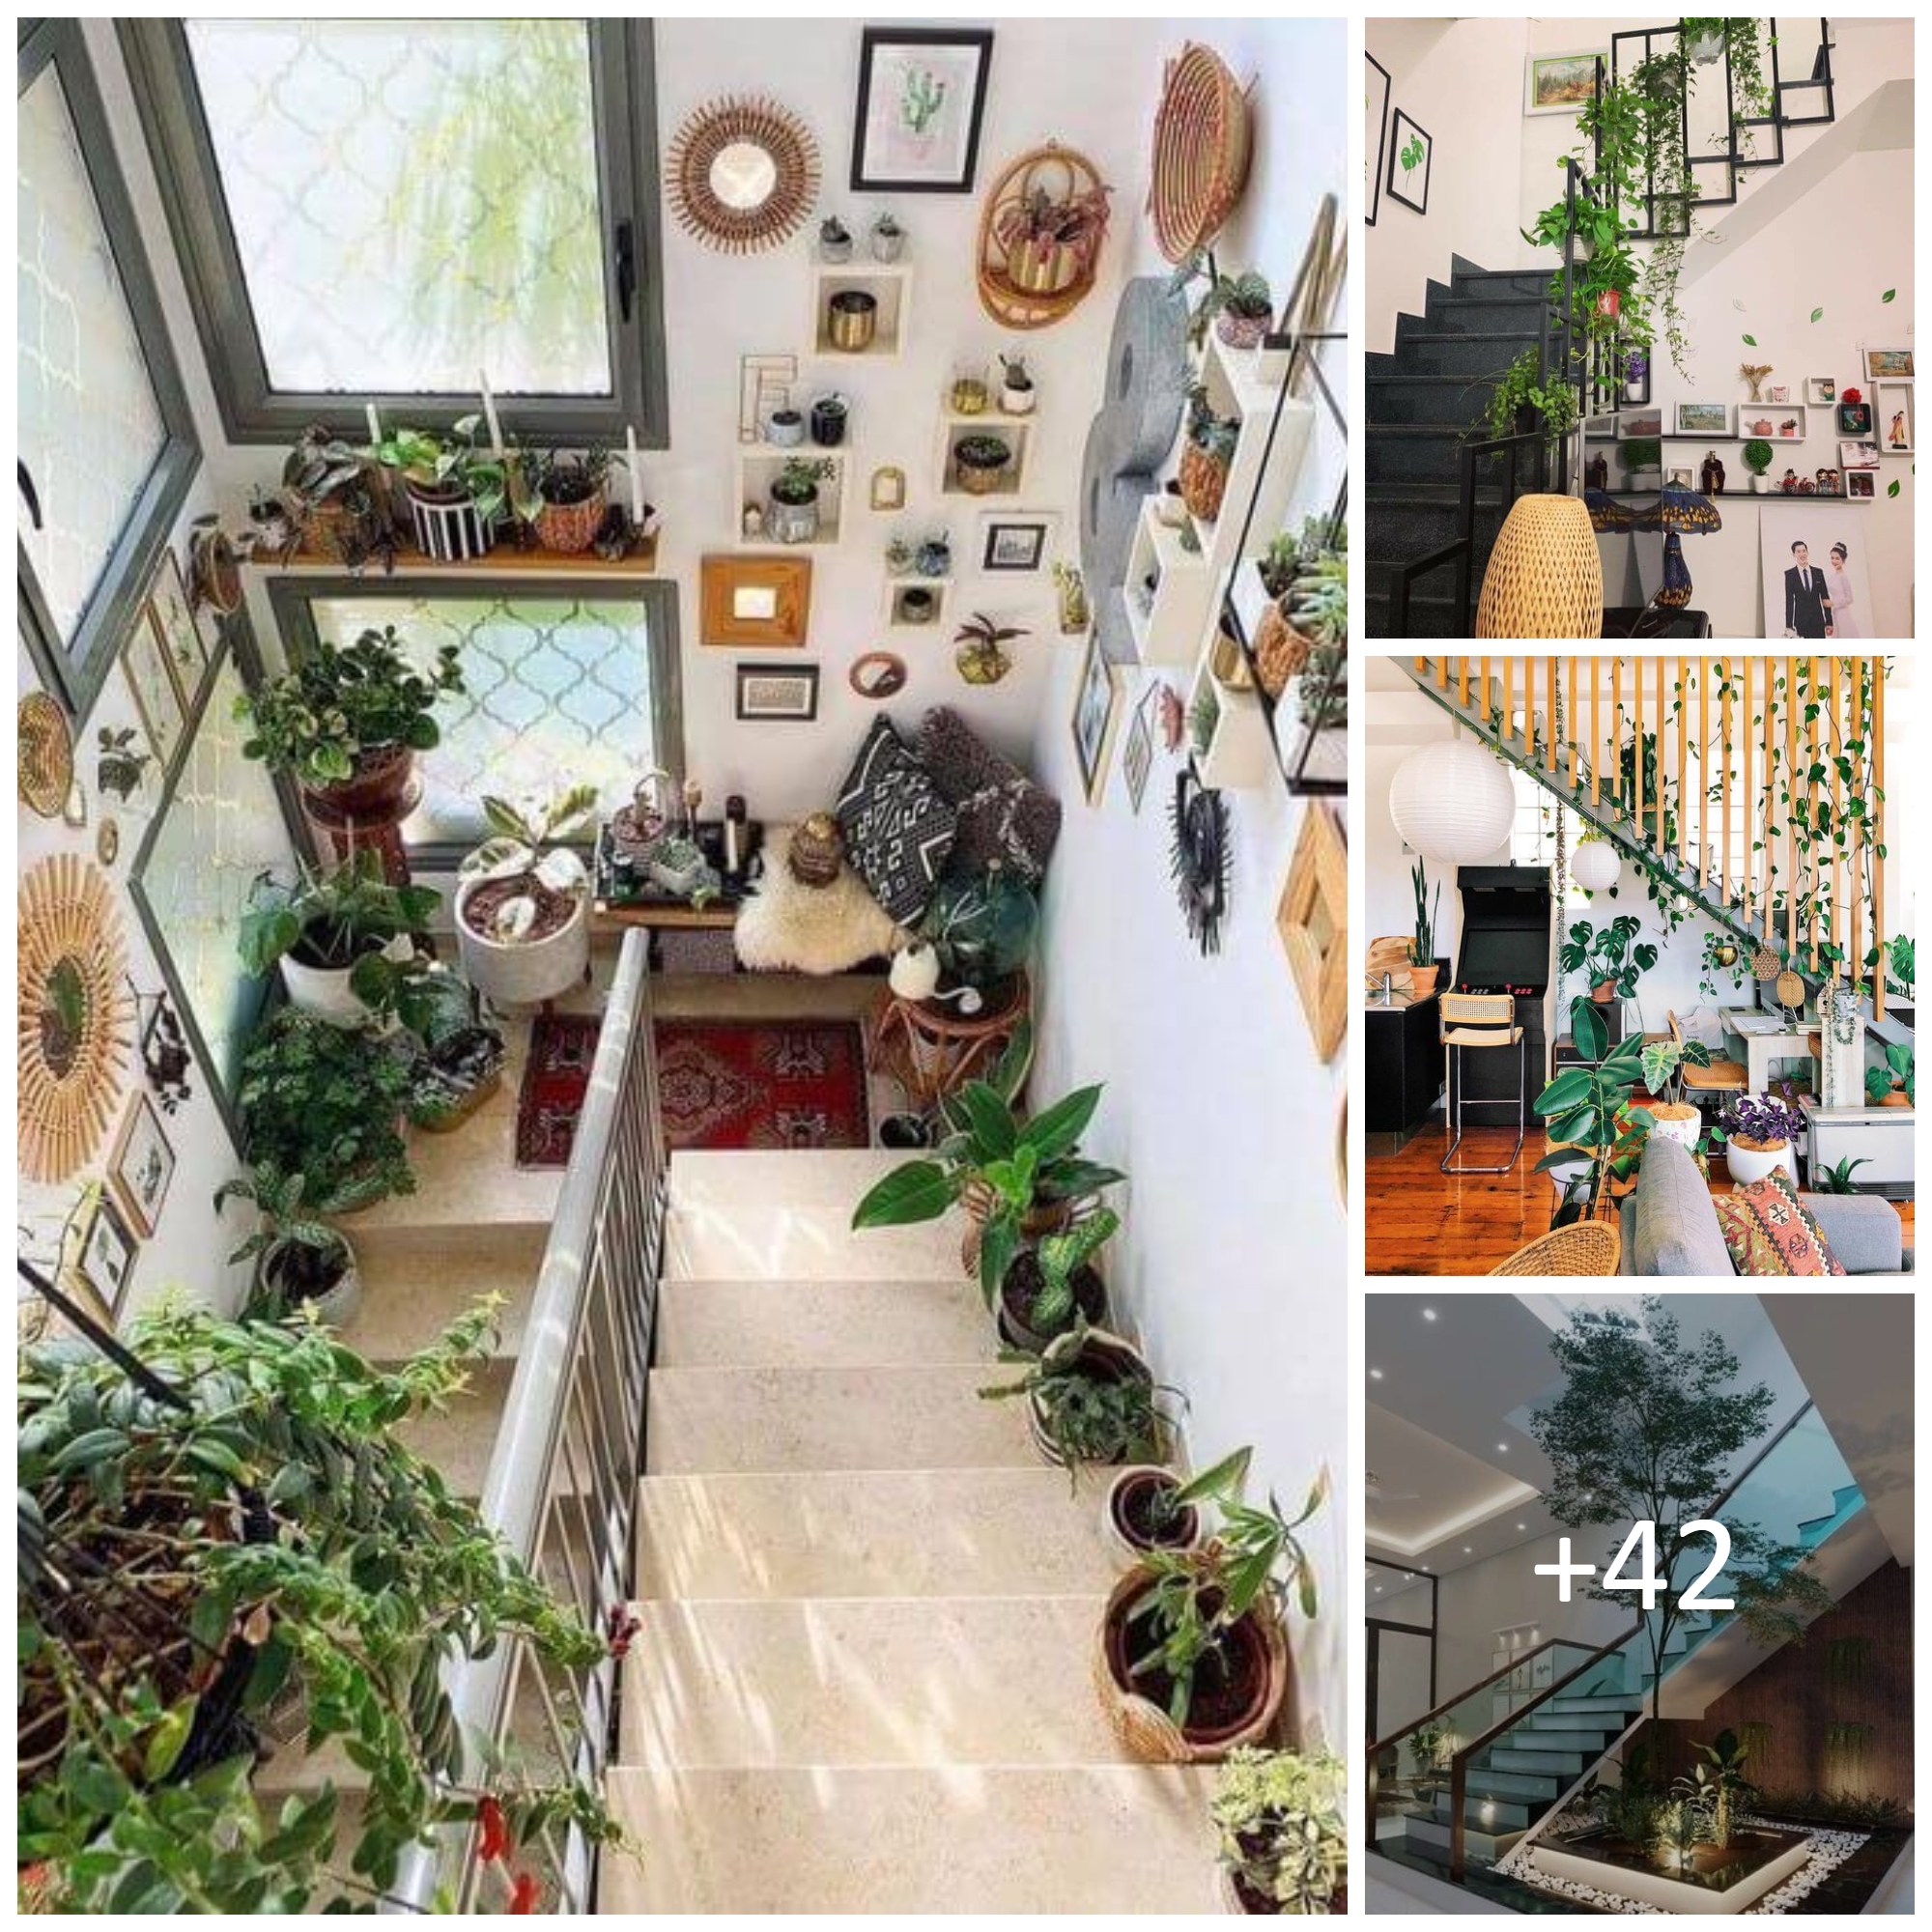 Plant Decor Ideas for That Space Under the Stairs